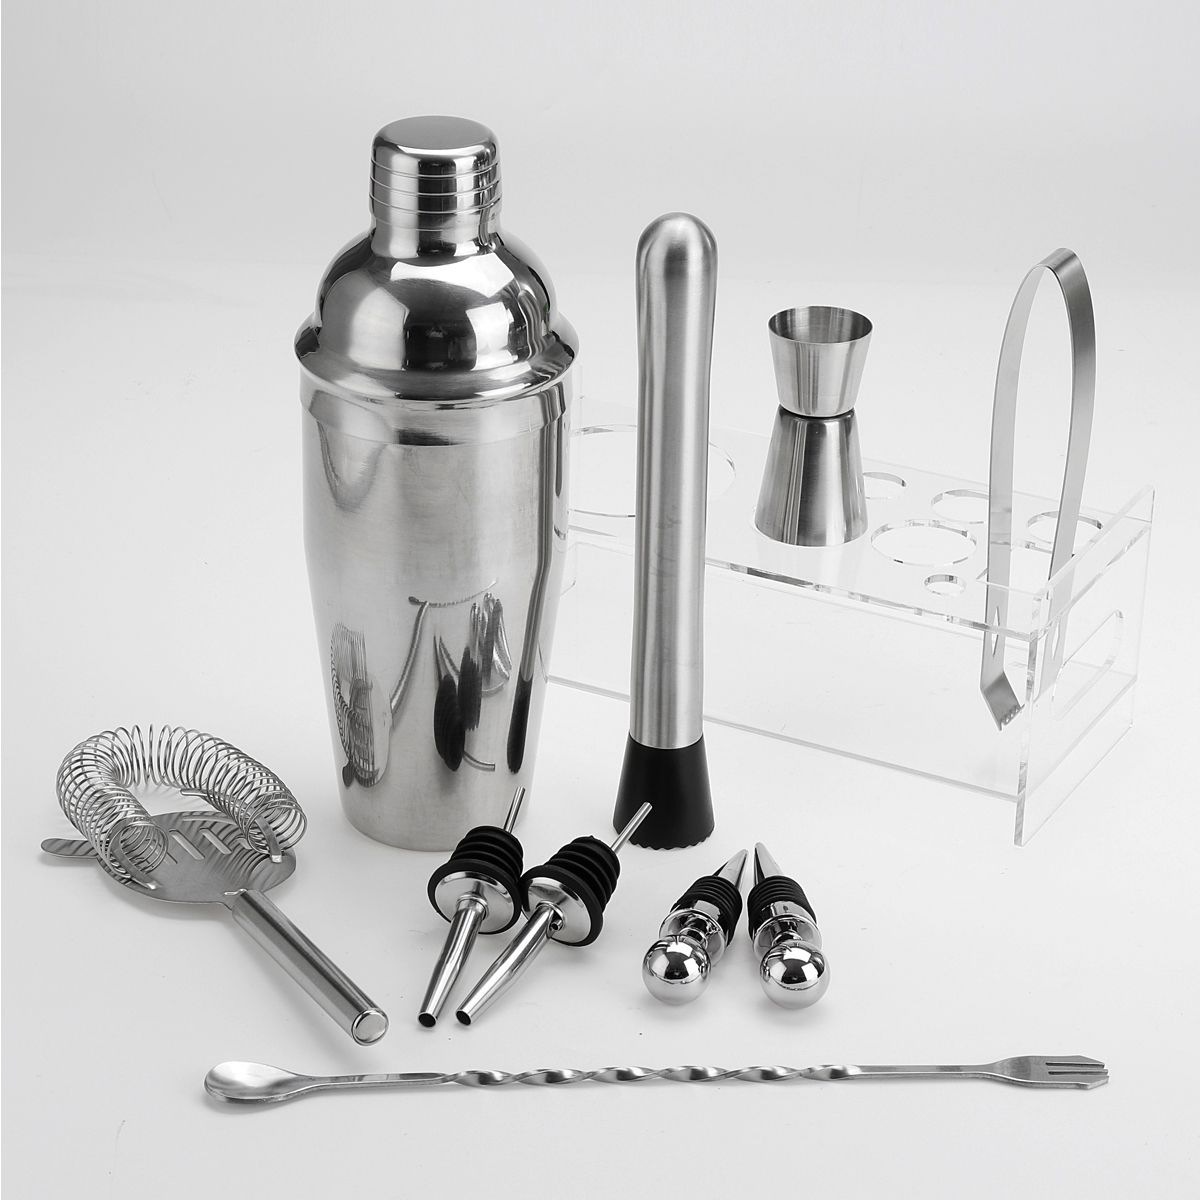 Stainless-Steel-Cocktail-Shaker-Set-11-Piece-Kit-Set-For-Pub-Bar-Home-Party-Tool-1707579